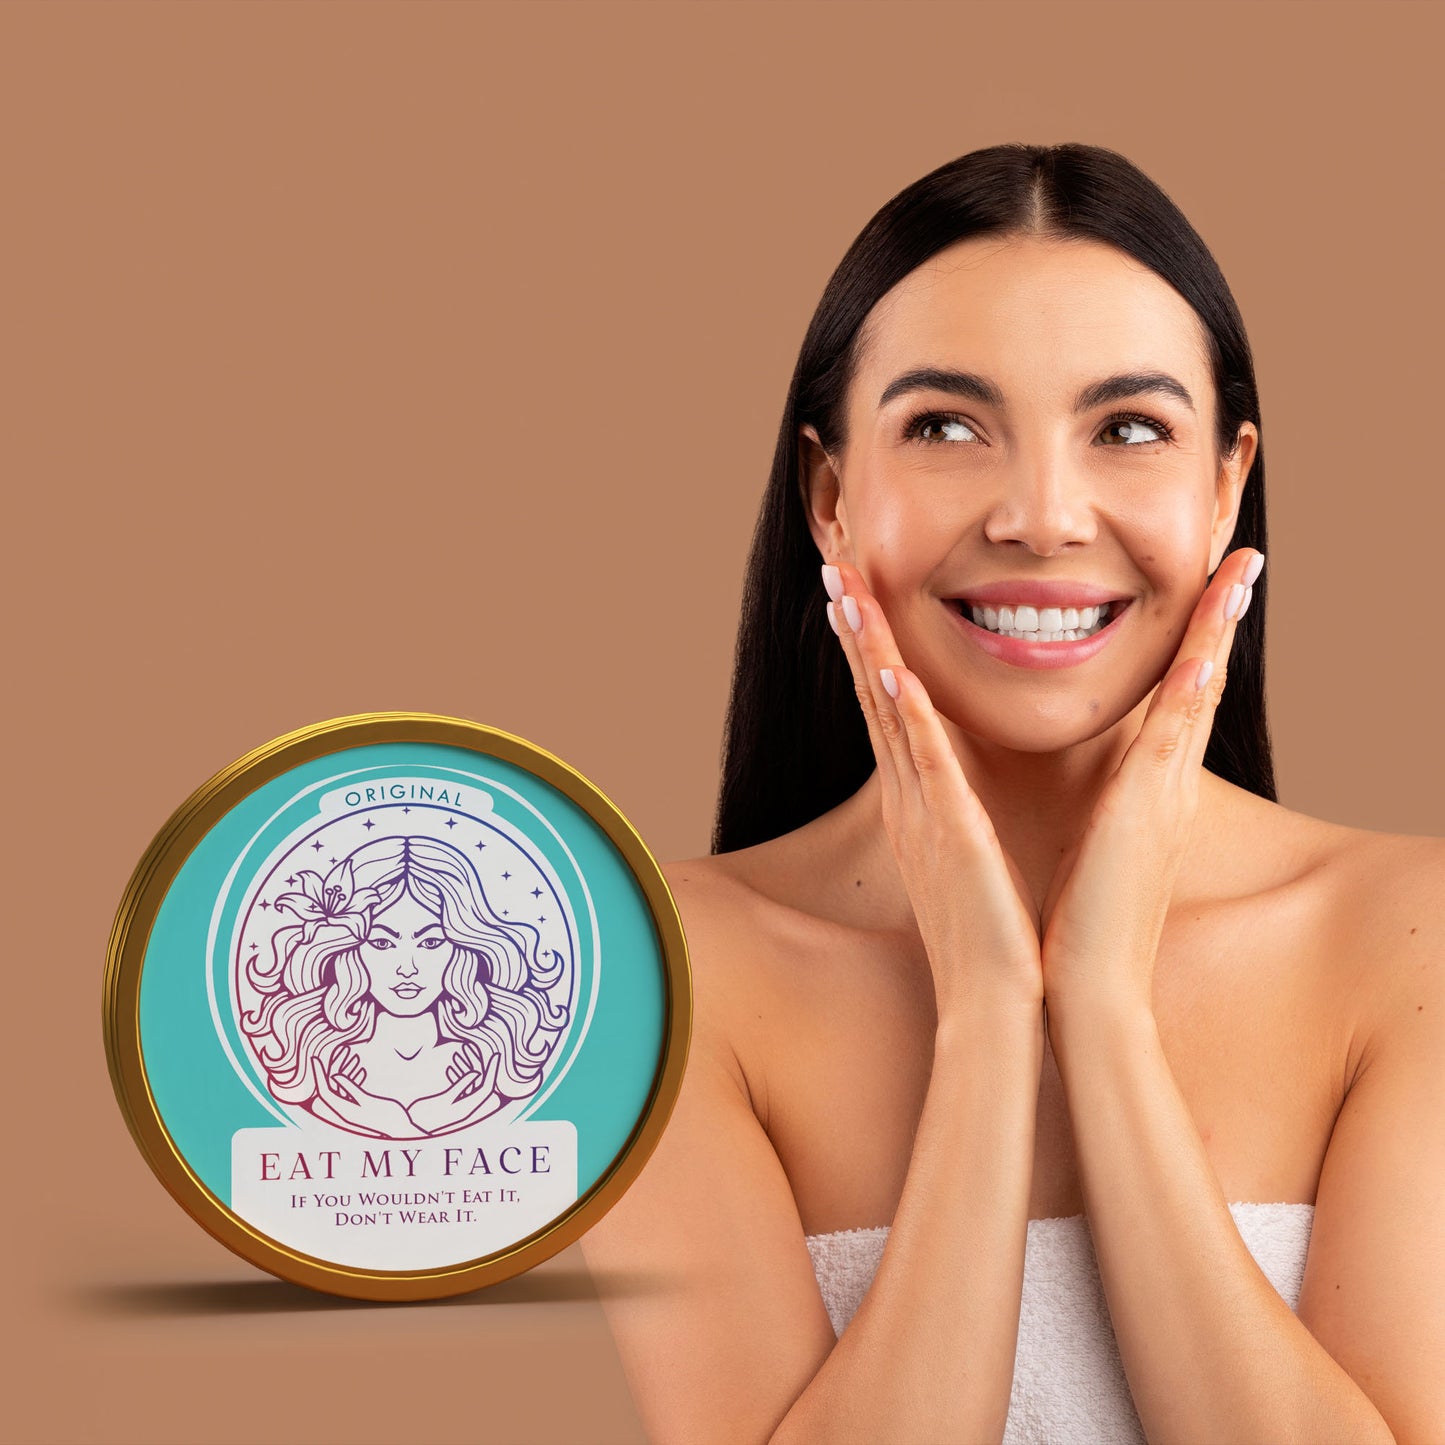 Grass-fed Beef Tallow Moisturizer by Eat My Face - AOC look-alike 